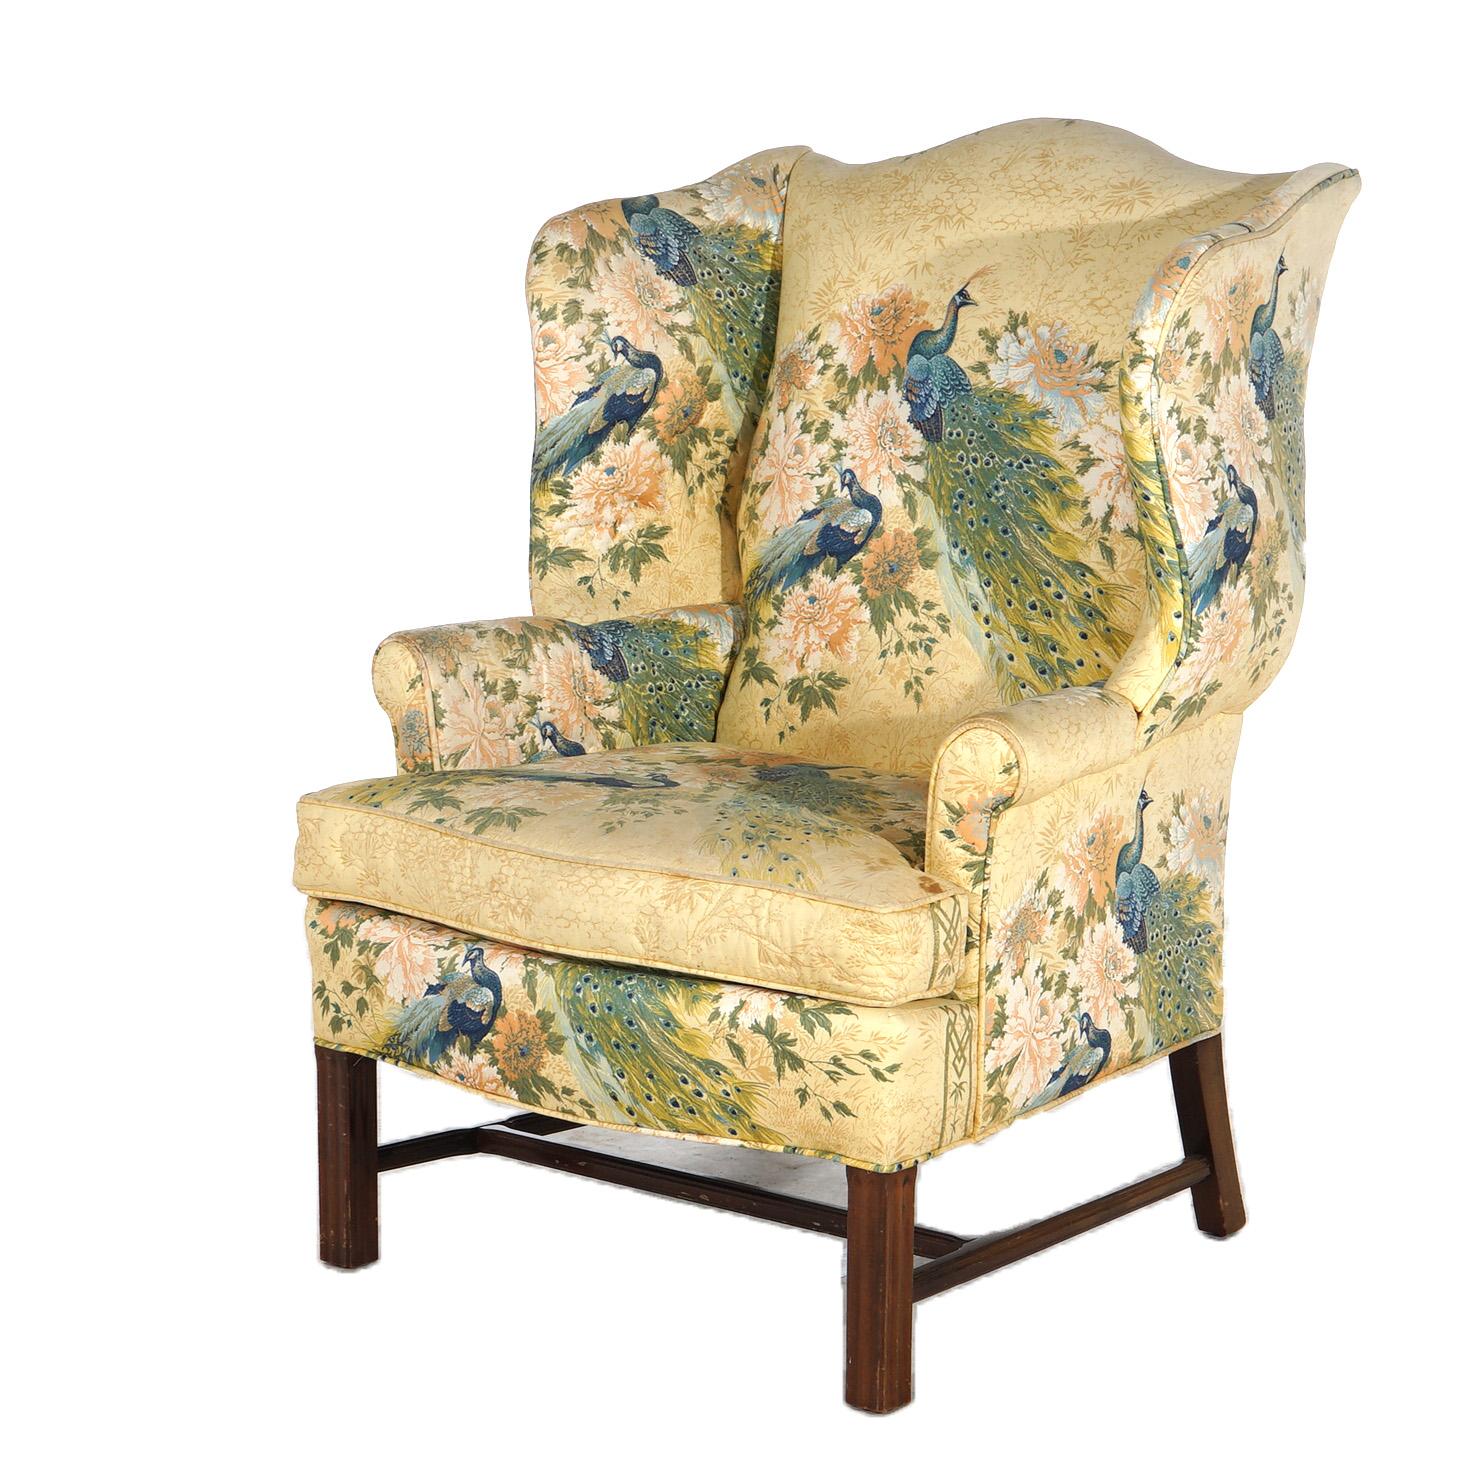 ***Ask About Reduced In-House Delivery Rates - Reliable Professional Service & Fully Insured***
Pair of English Colonial Peacock & Floral Decorated Wing Back Chairs 20thC

Measures - 43